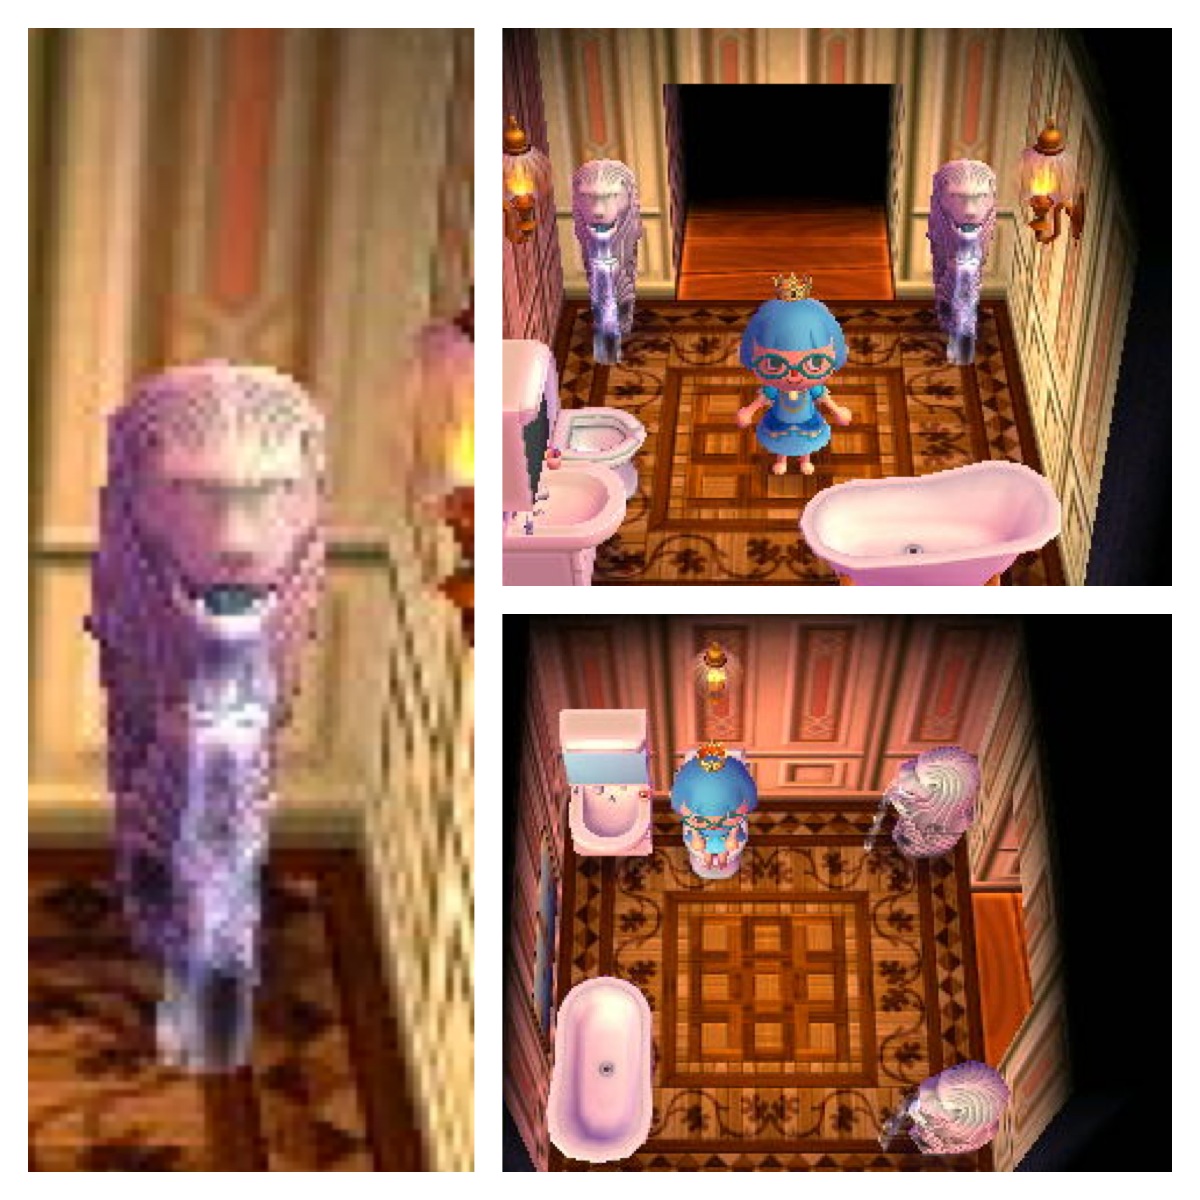 My Animal Crossing bathroom, with a pair of Merlions.